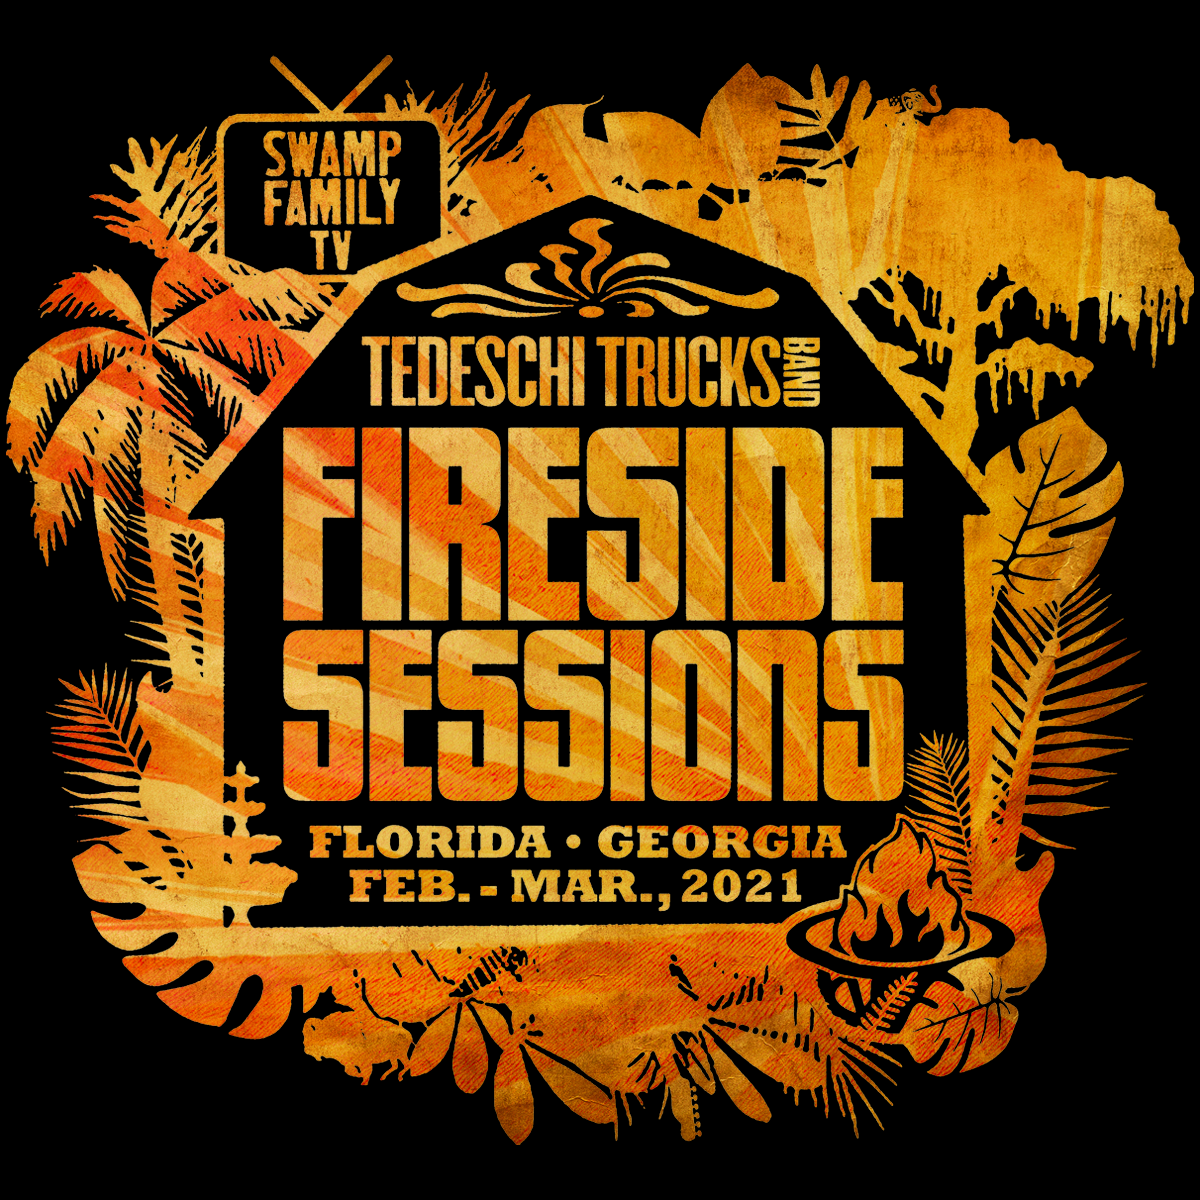 FIRESIDE SESSIONS ONLY THREE NEW EPISODES REMAIN